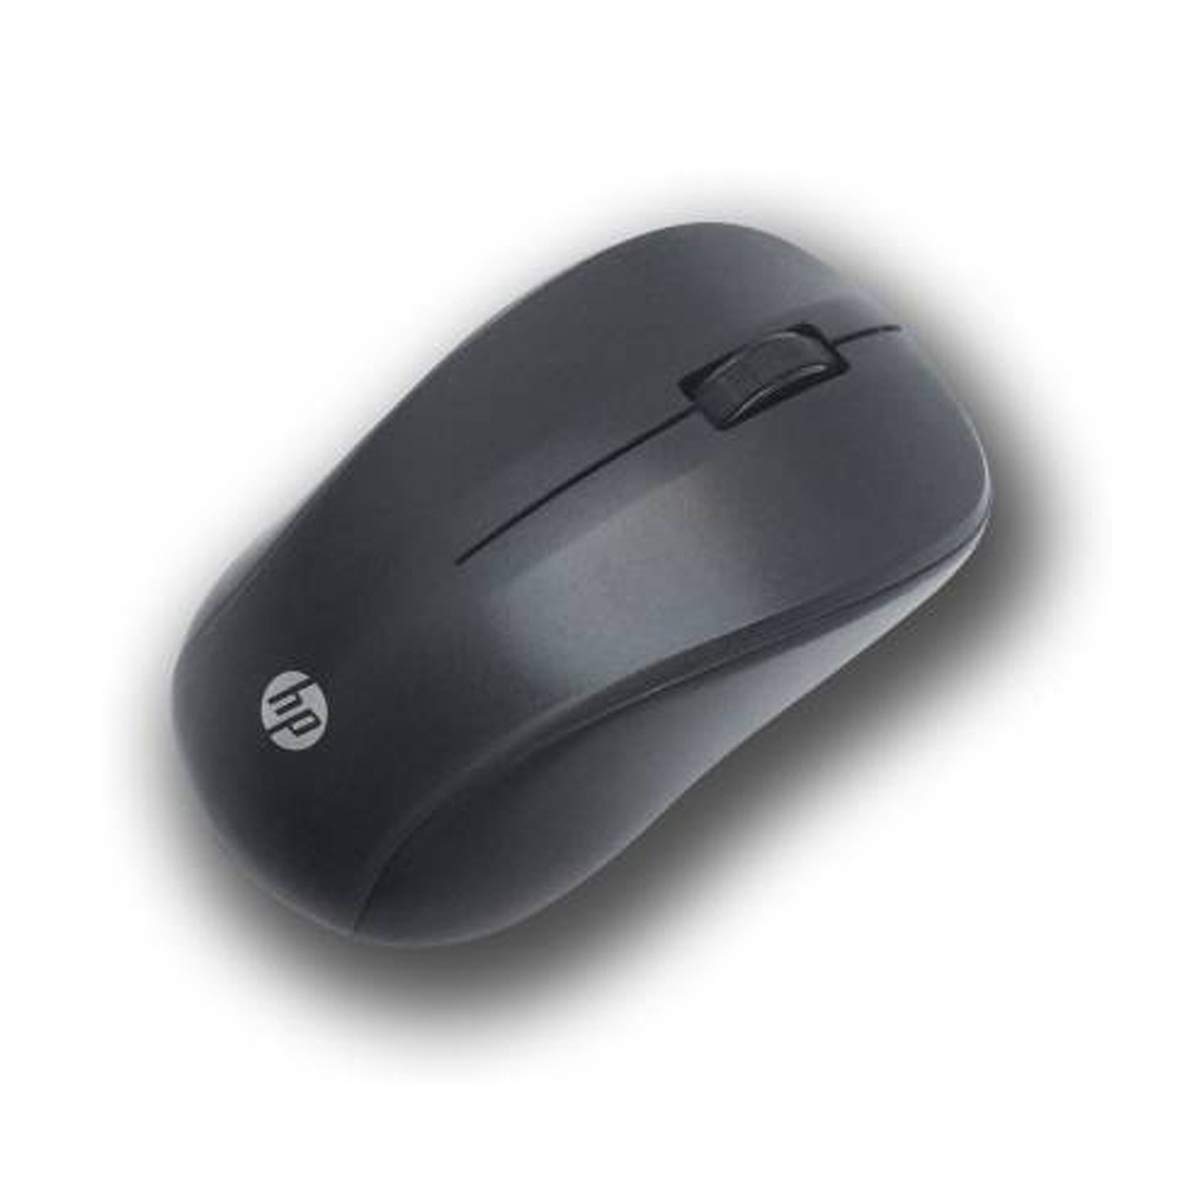 what type of wireless mouse is best for a mac airbook?